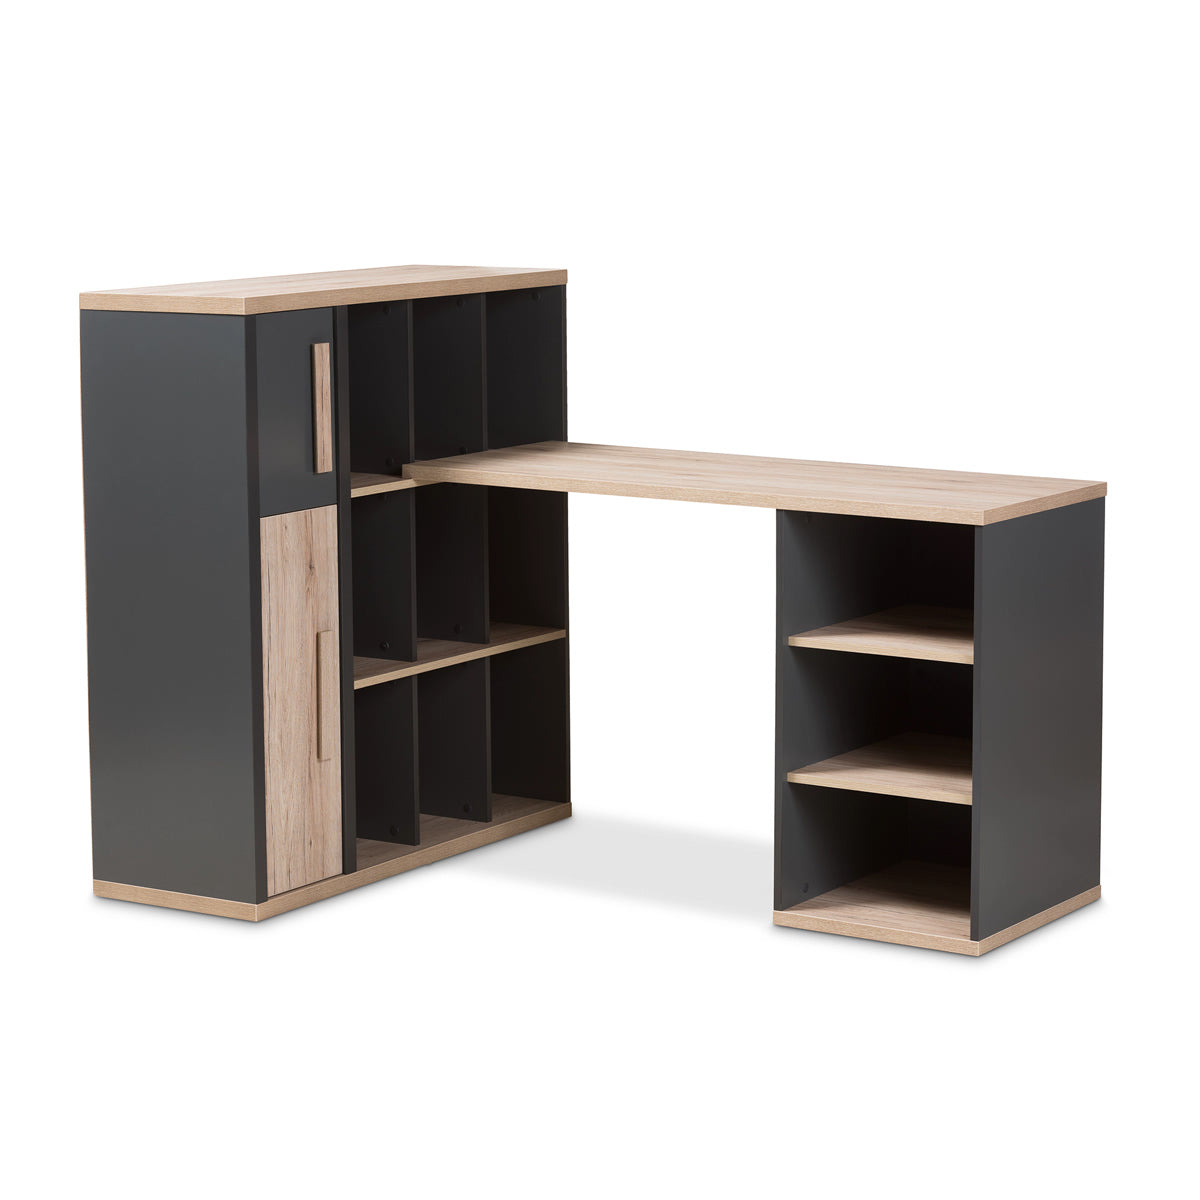 Baxton Studio Pandora Modern and Contemporary Dark Grey and Light Brown Two-Tone Study Desk with Built-in Shelving Unit Baxton Studio-Desks-Minimal And Modern - 1